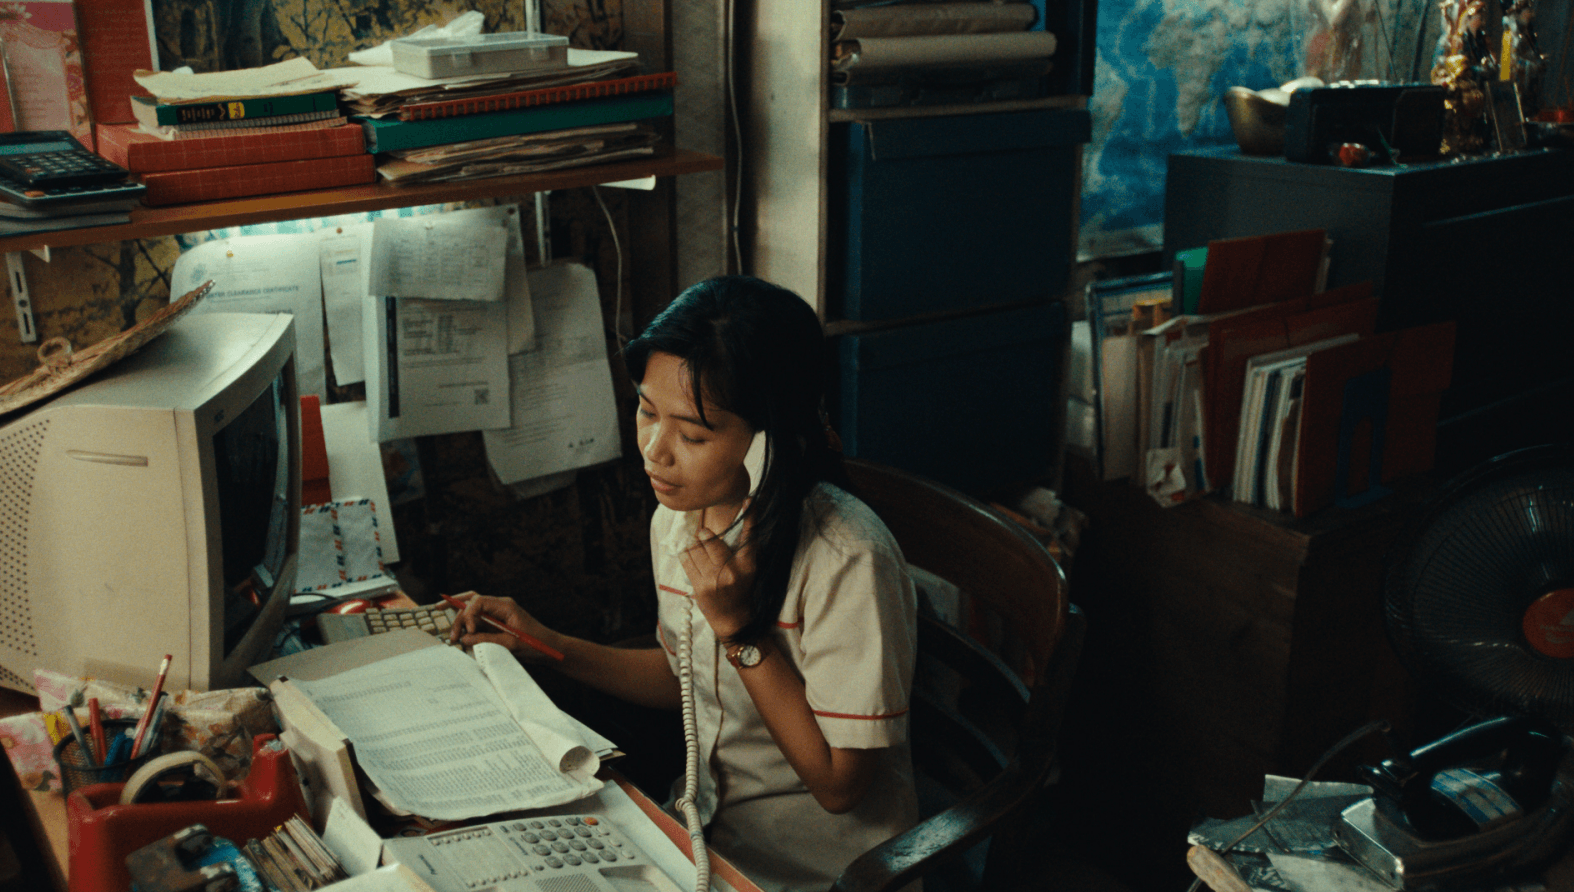 Sam Manacsa on 80th Venice Film Festival entry ‘Cross My Heart And Hope To Die’